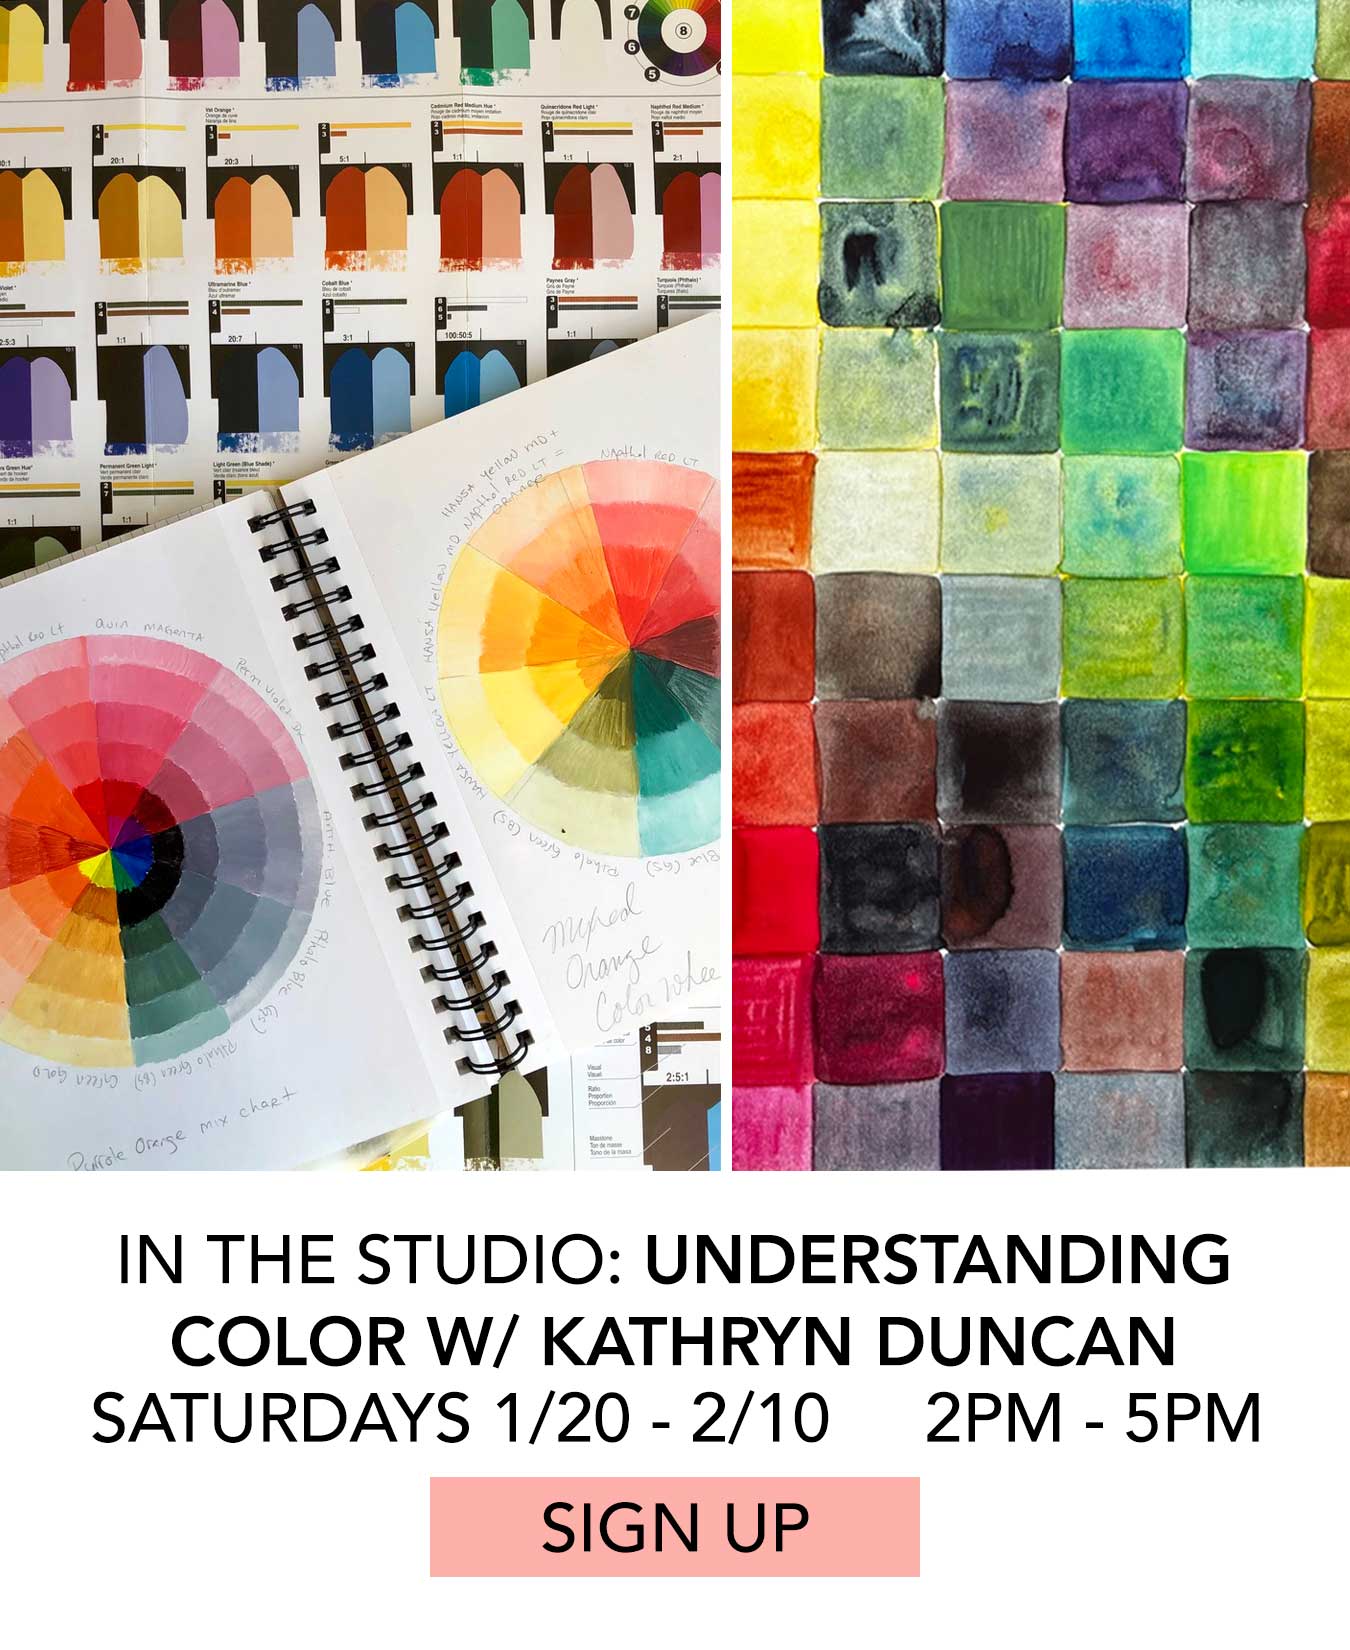 In the Studio: Understanding Color with Kathryn Duncan. Saturdays 1/20 - 2/10 from 2:00pm to 5:00pm. Click to Sign Up.